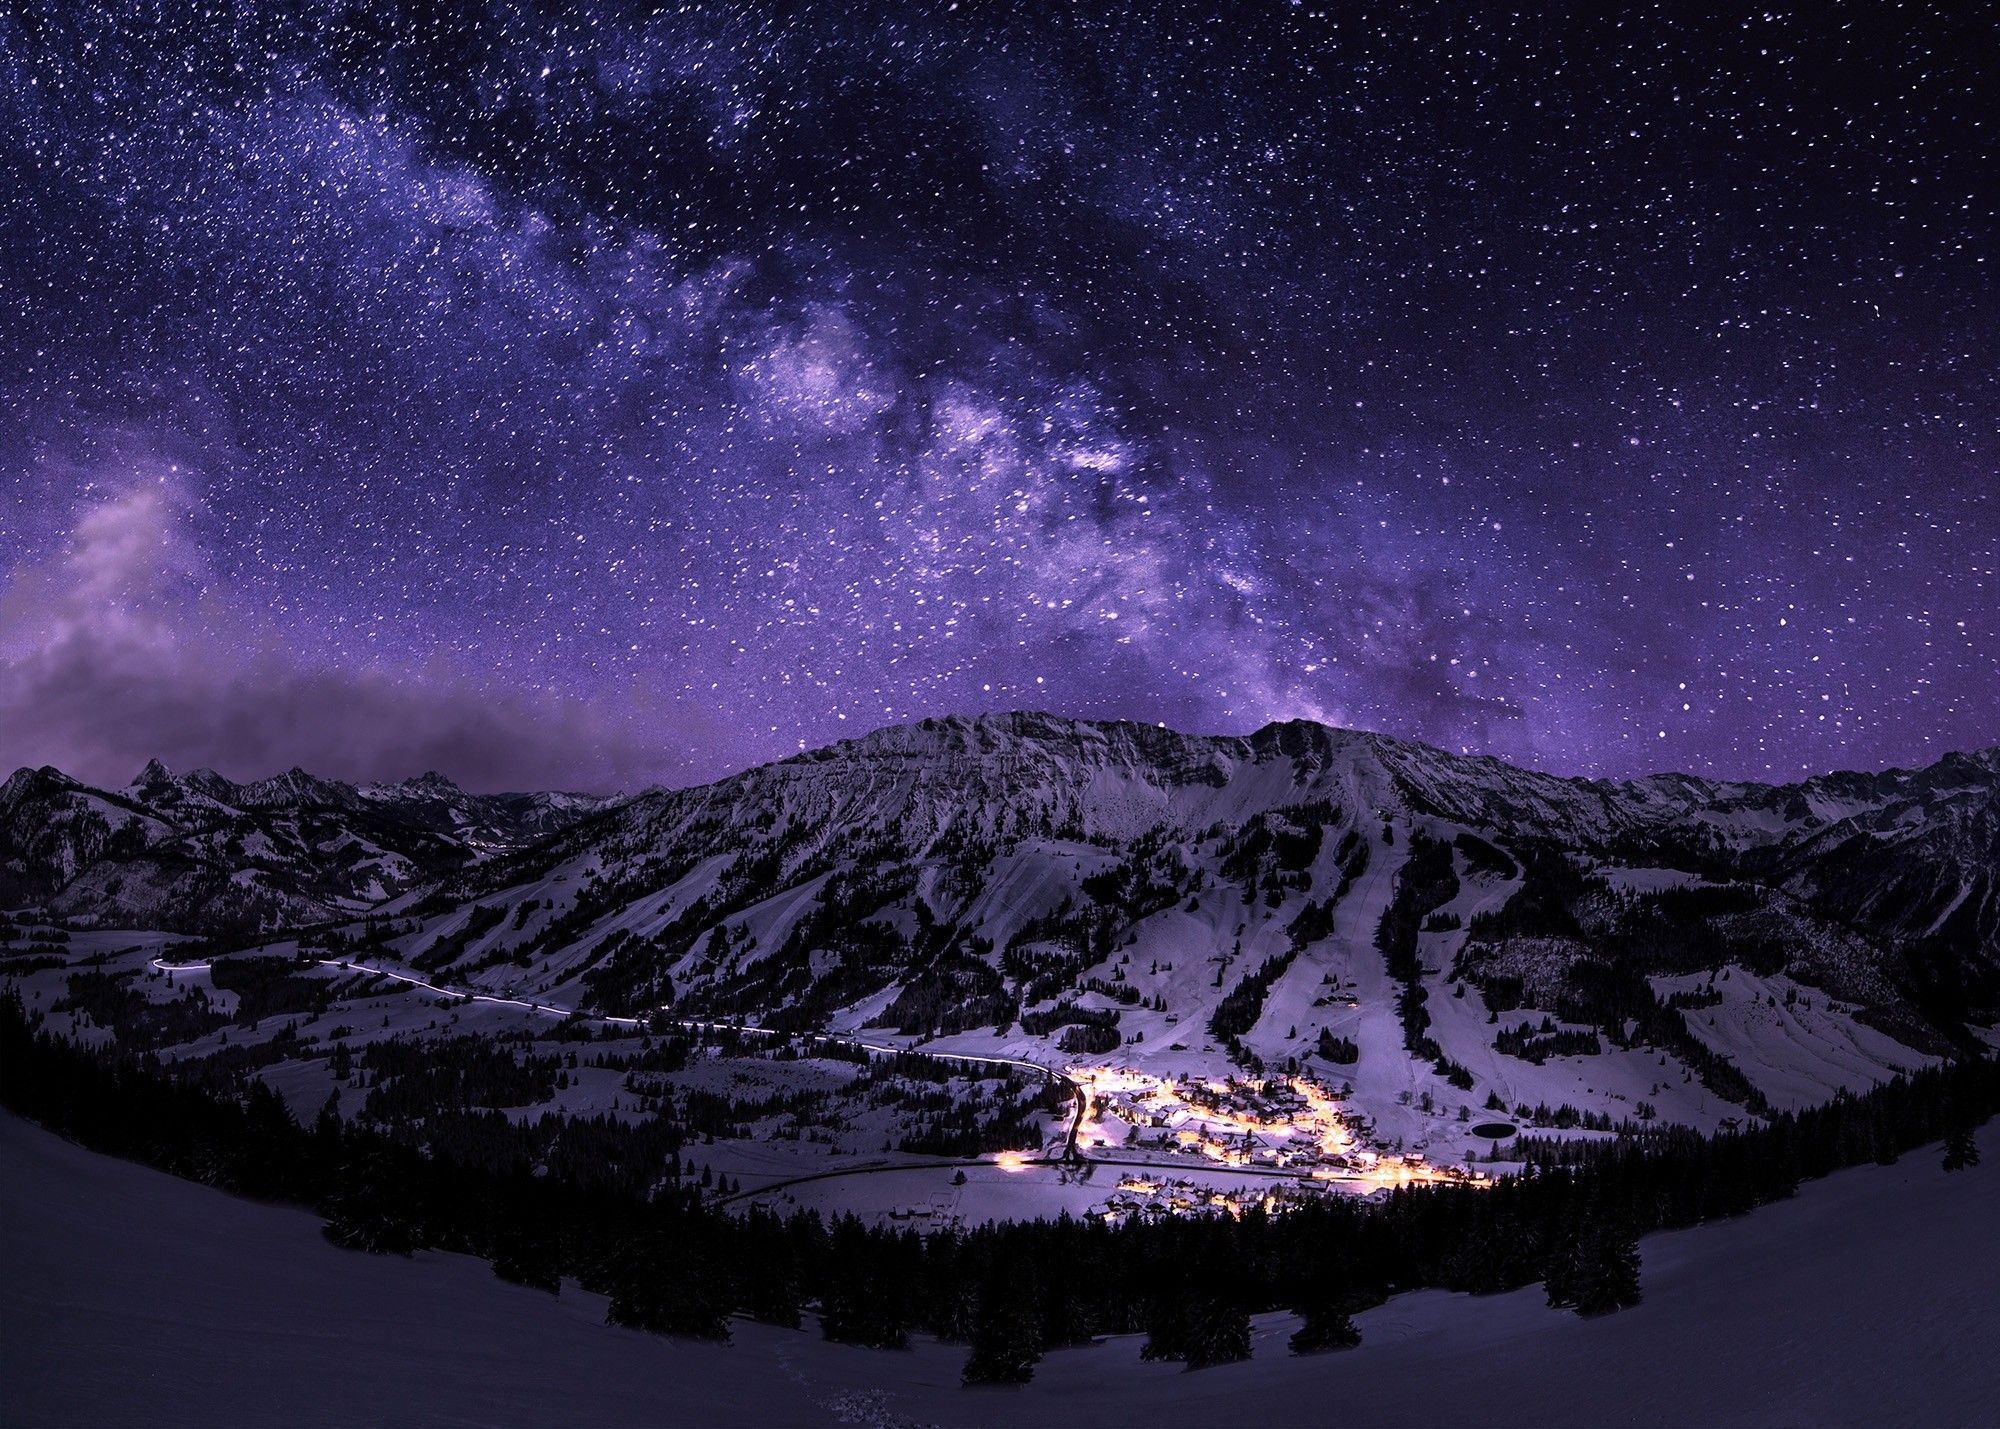 Galaxy Stars Over Mountain Wallpapers Wallpaper Cave